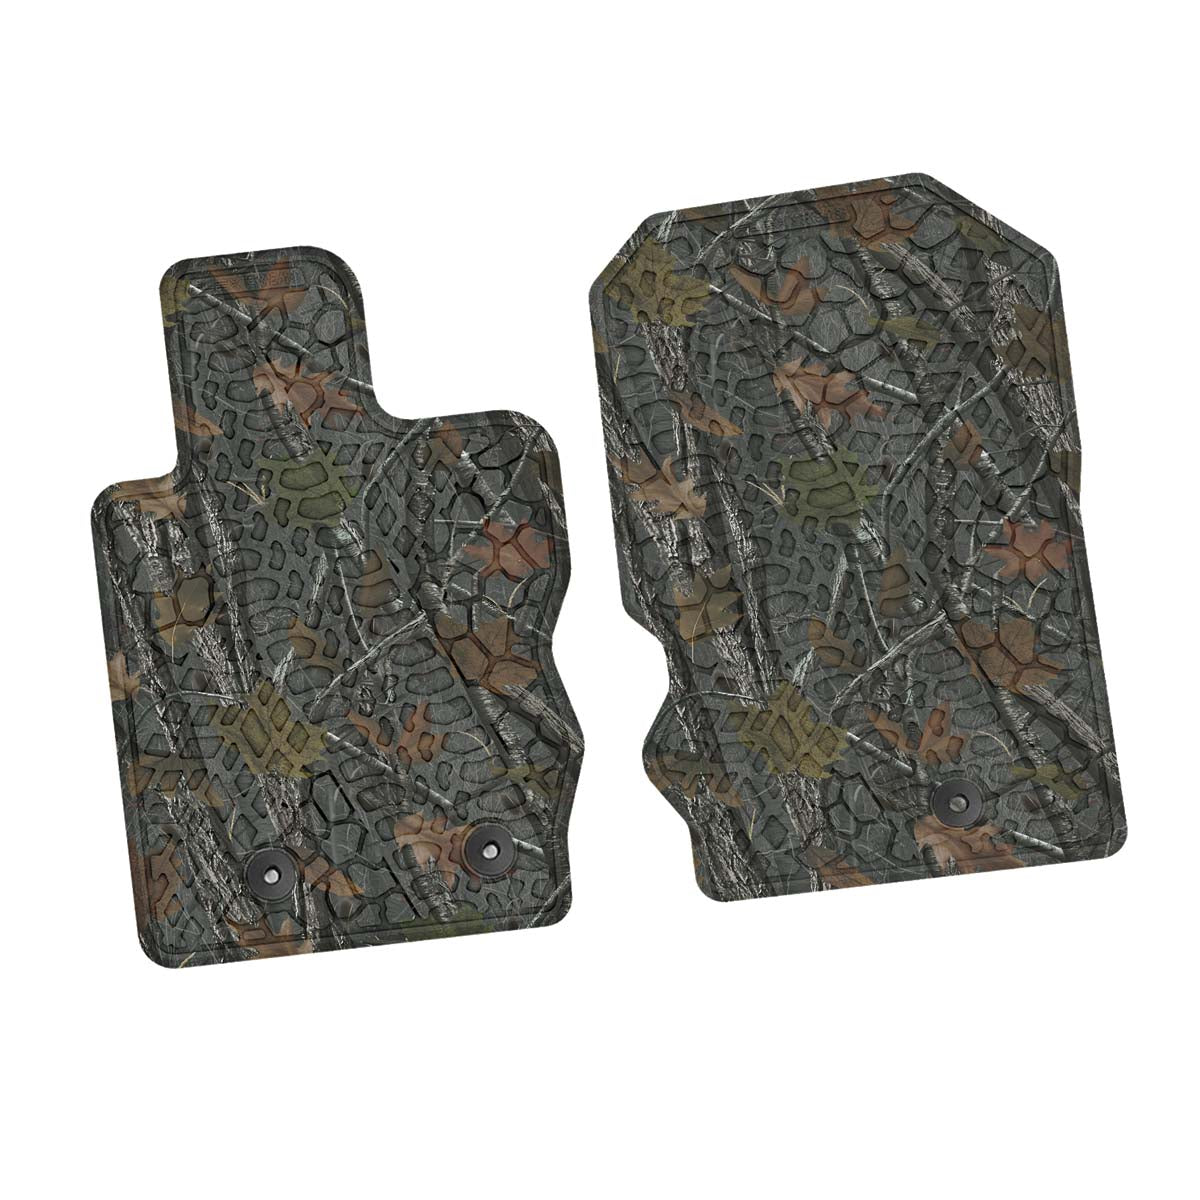 Bronco Floor Mats 21-23 Ford Bronco 2 Dr & 4 Dr 2 Piece Tire Tread/Scorched Earth Scene - Rugged Woods FlexTread